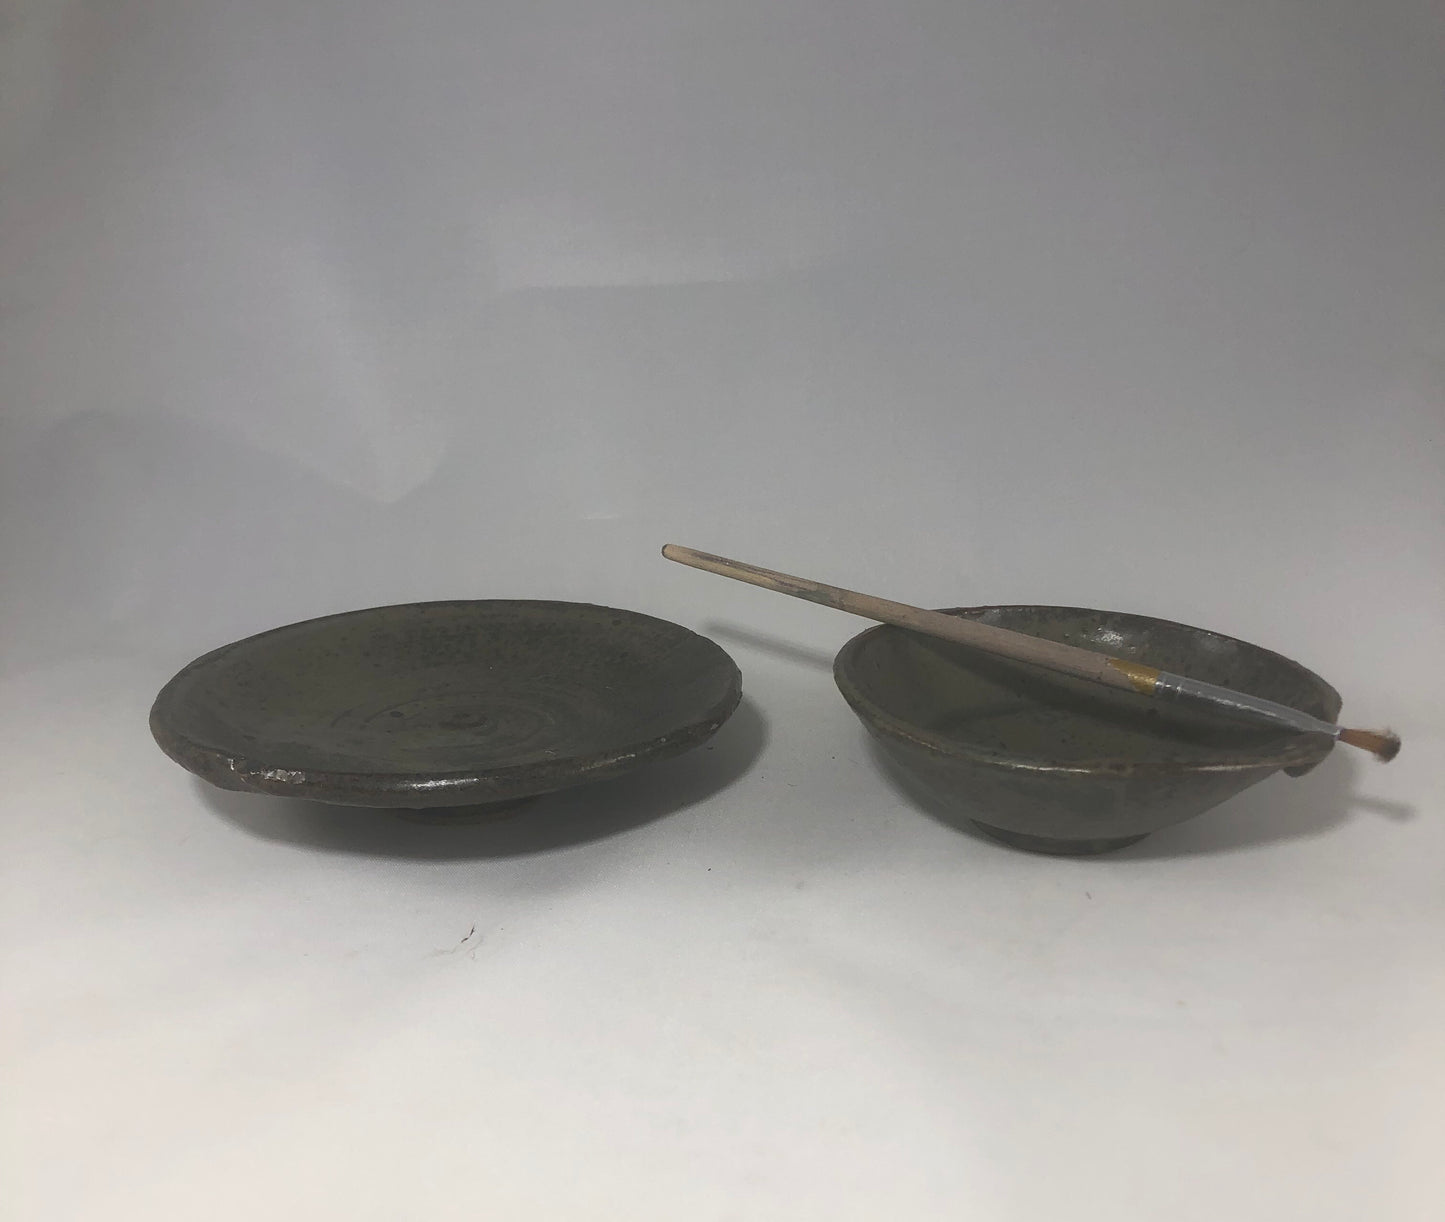 Small bowl with Saucer